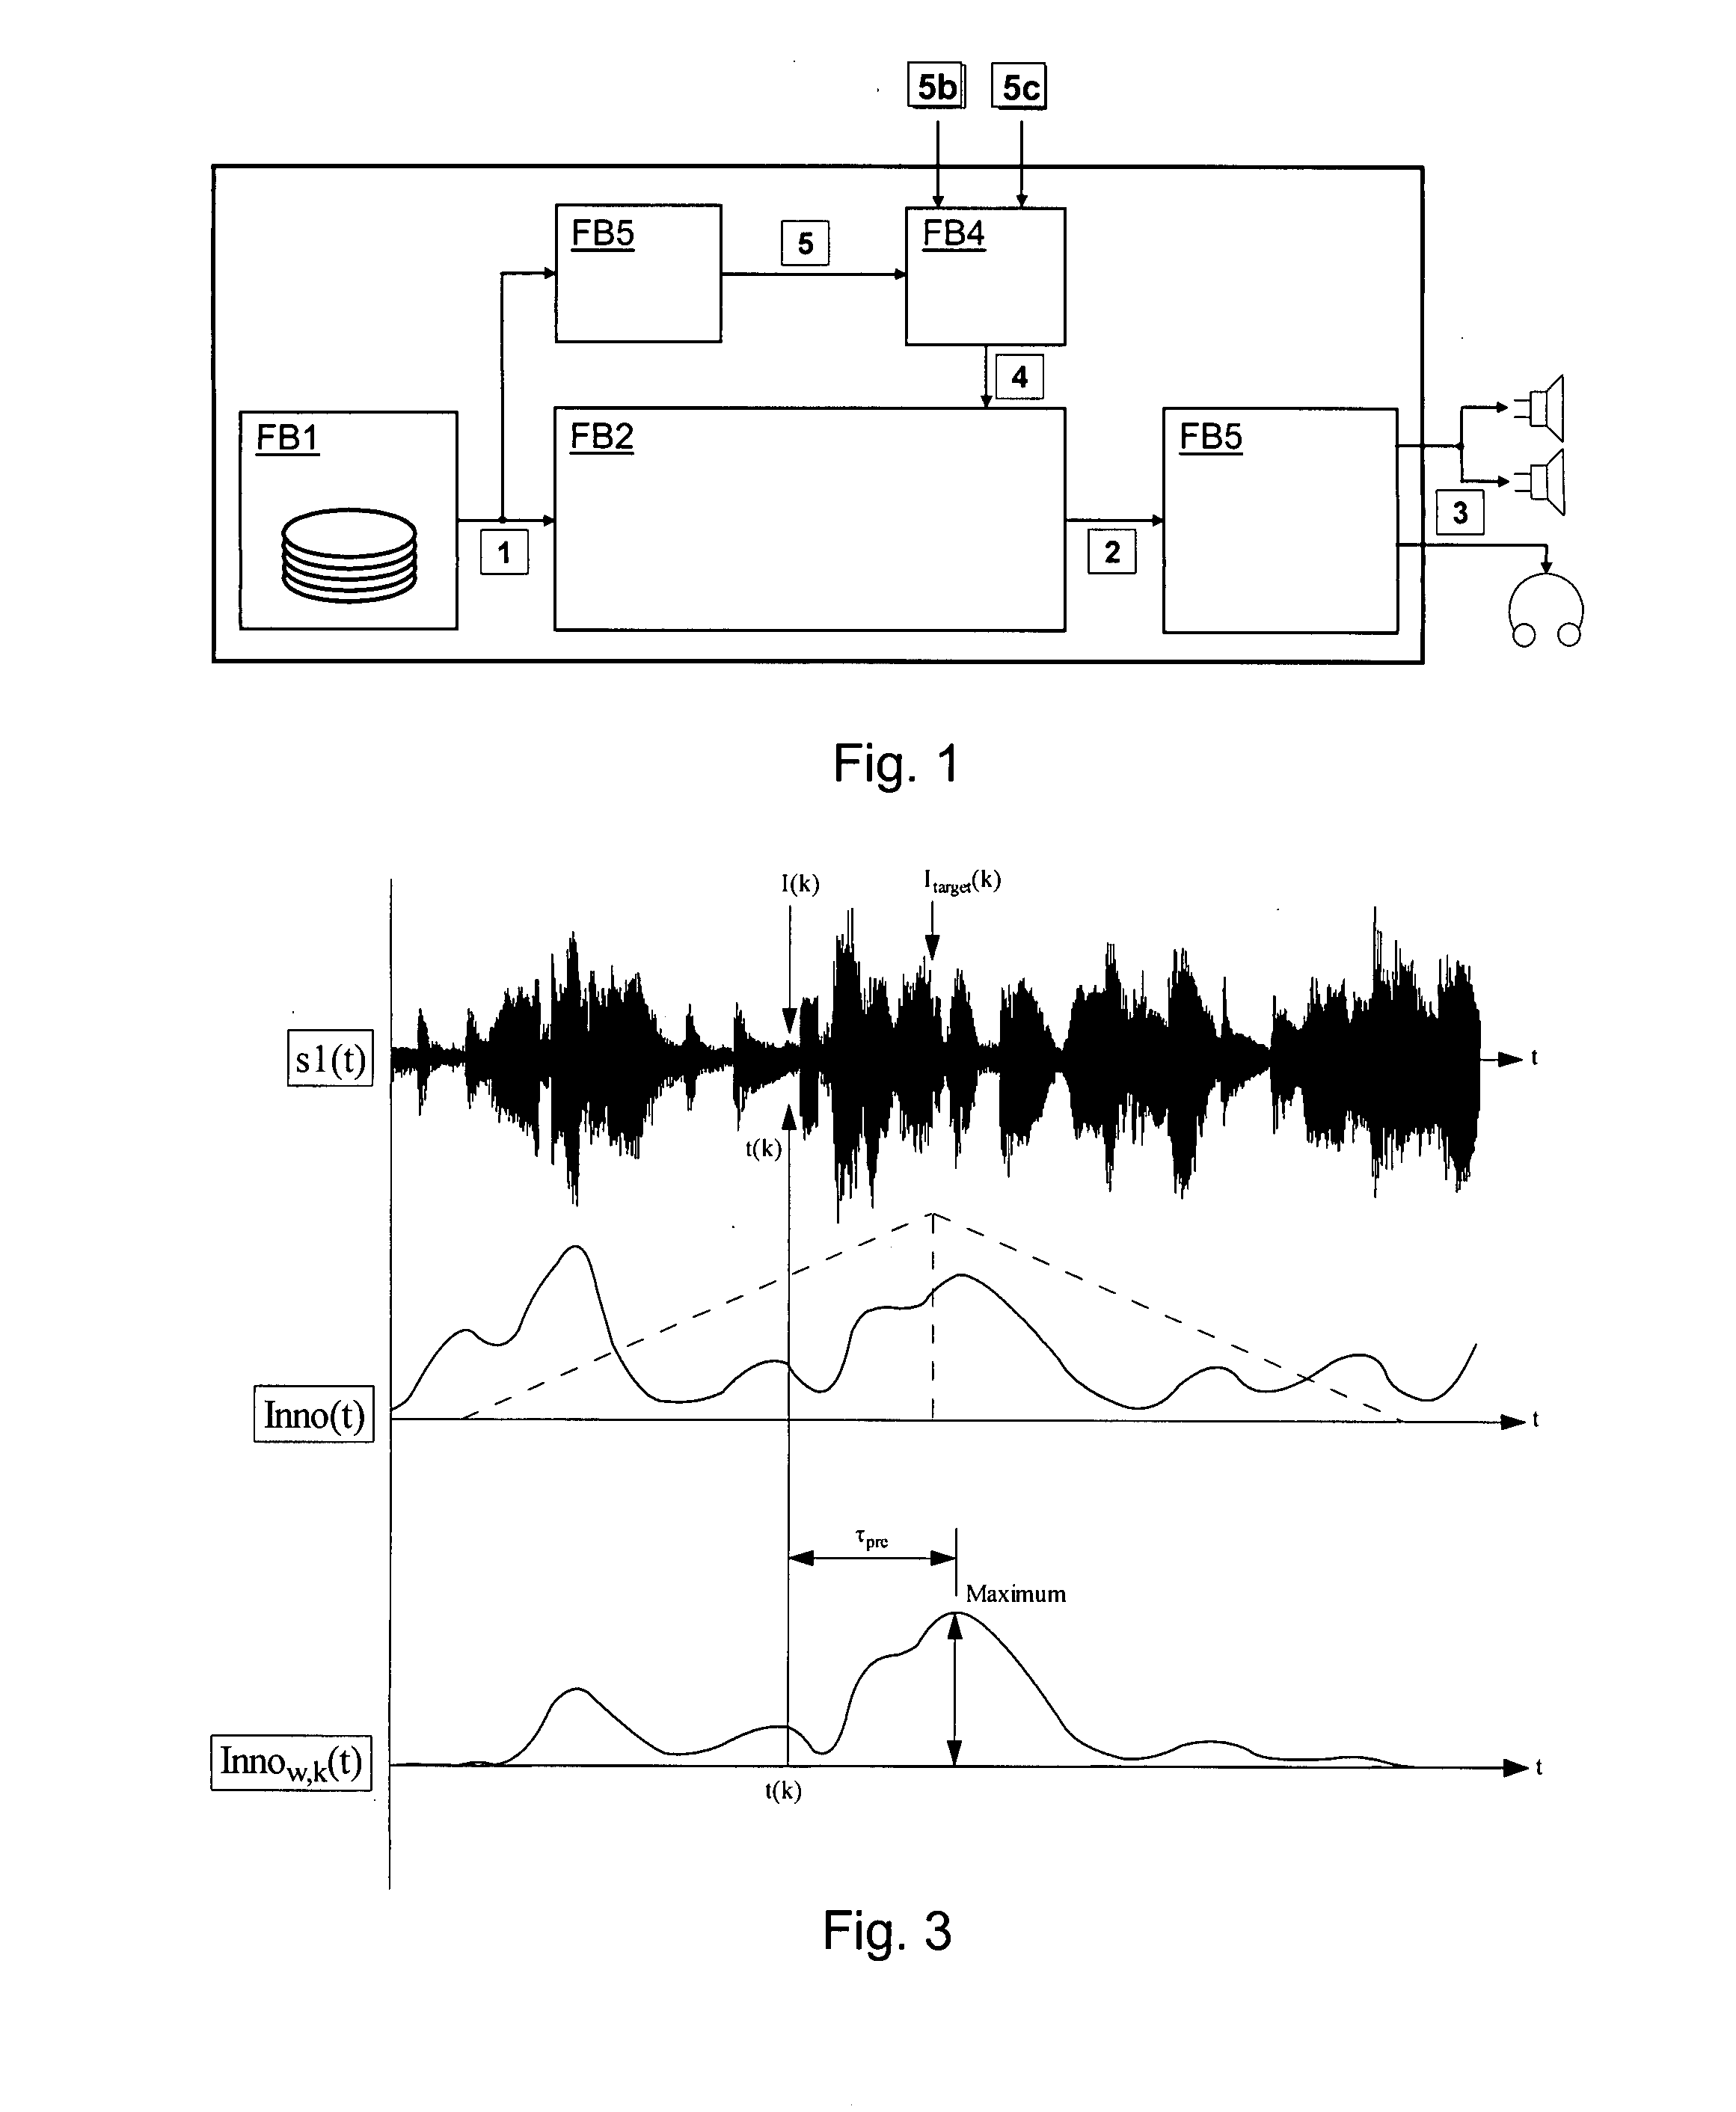 Method for processing audio data into a condensed version